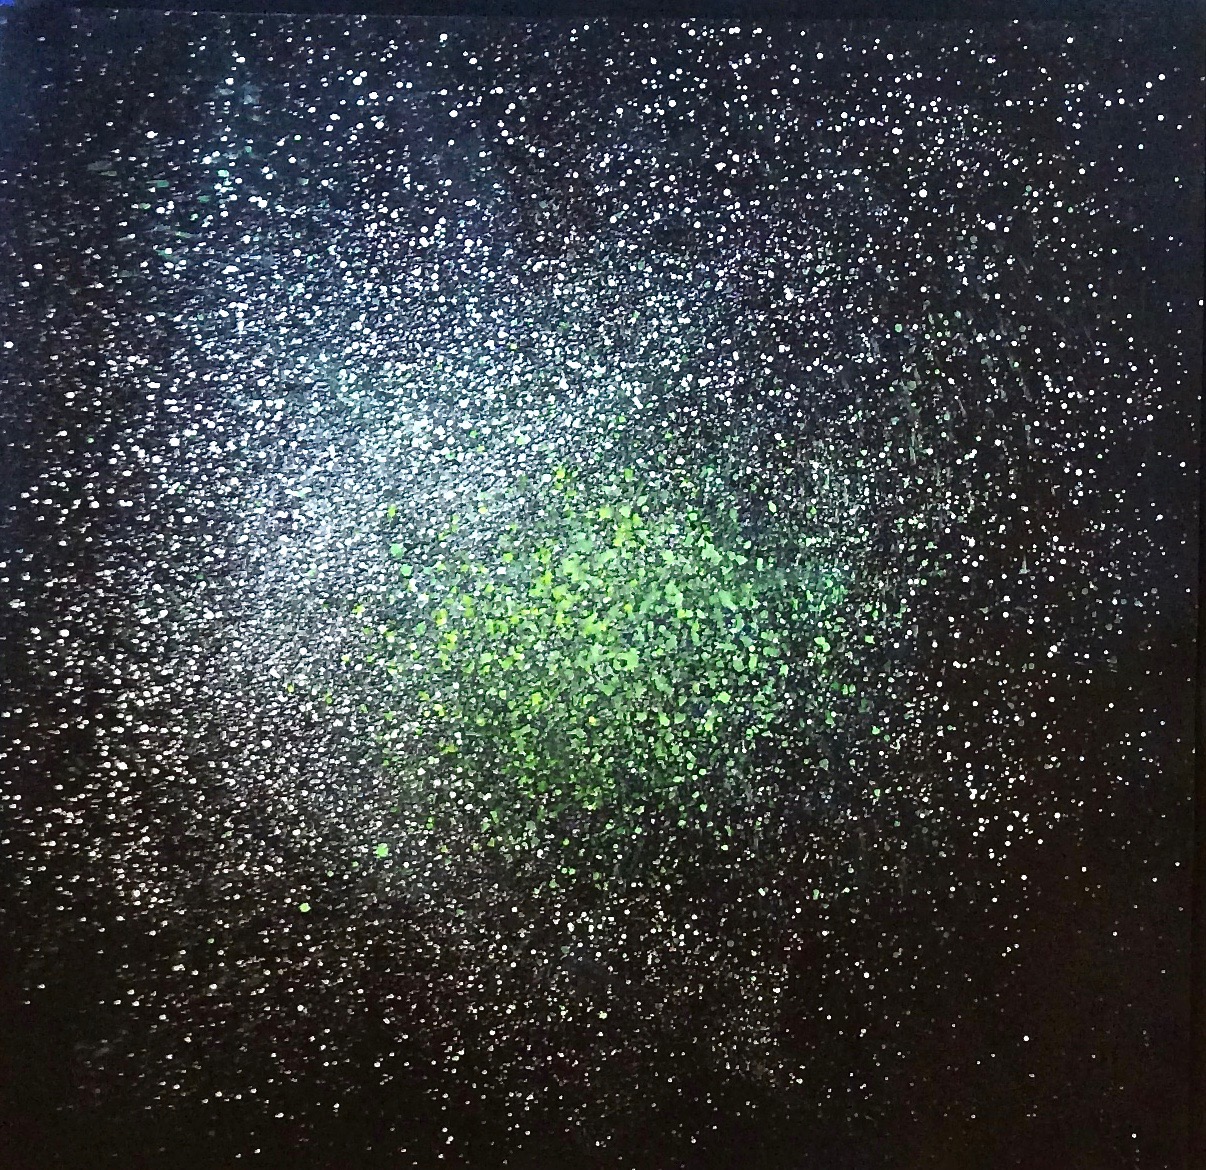  Green Glare, 2018 59 x 61 inches Acrylic on 2/8” closed cell black foam 